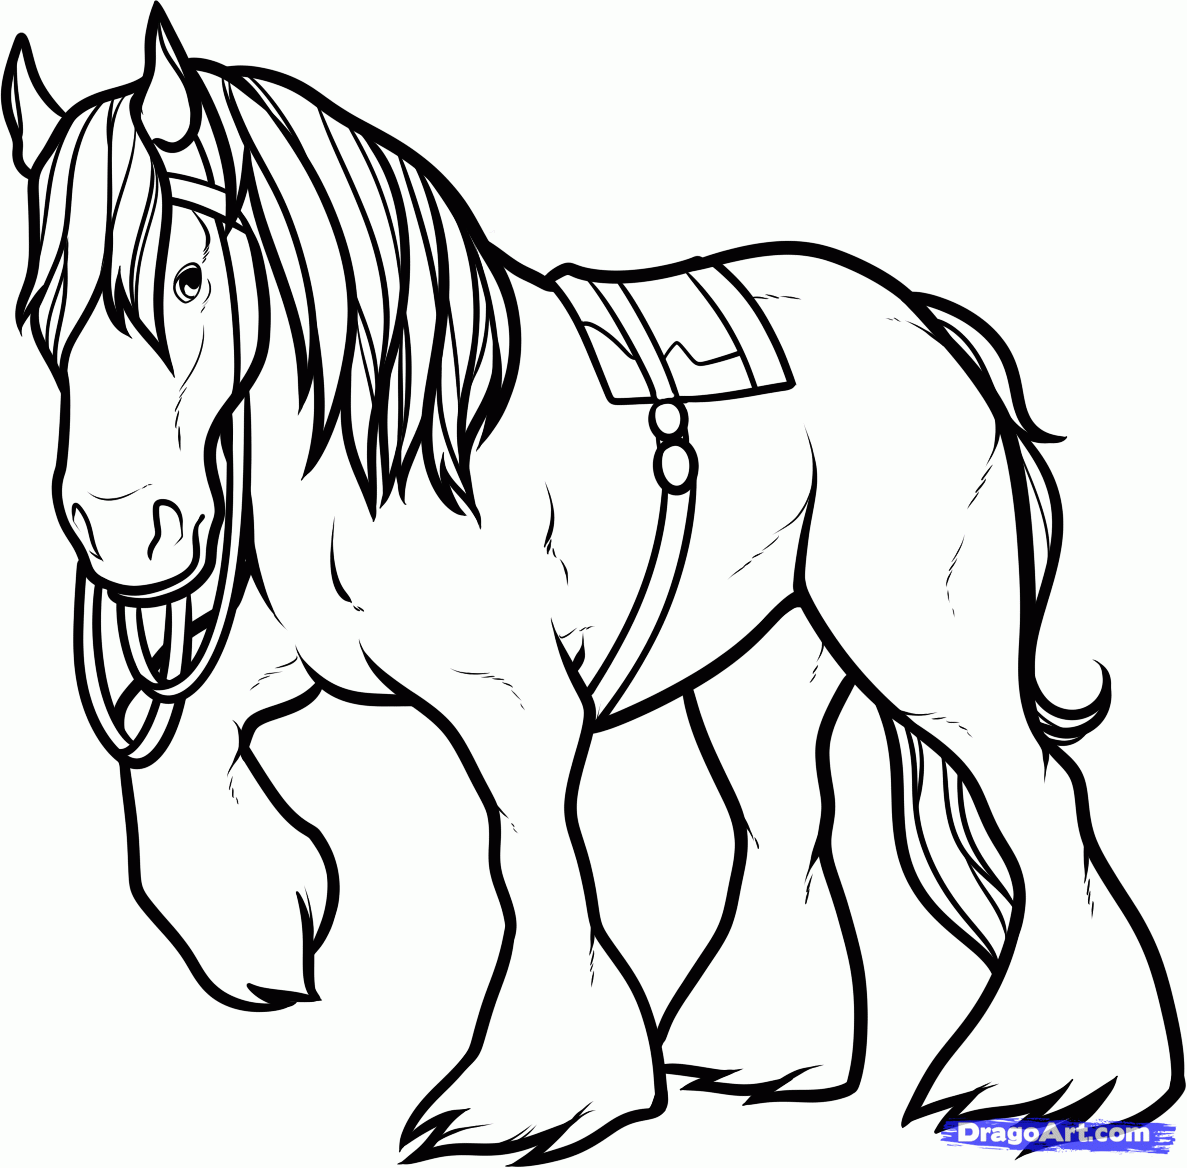 Clydesdale coloring #11, Download drawings